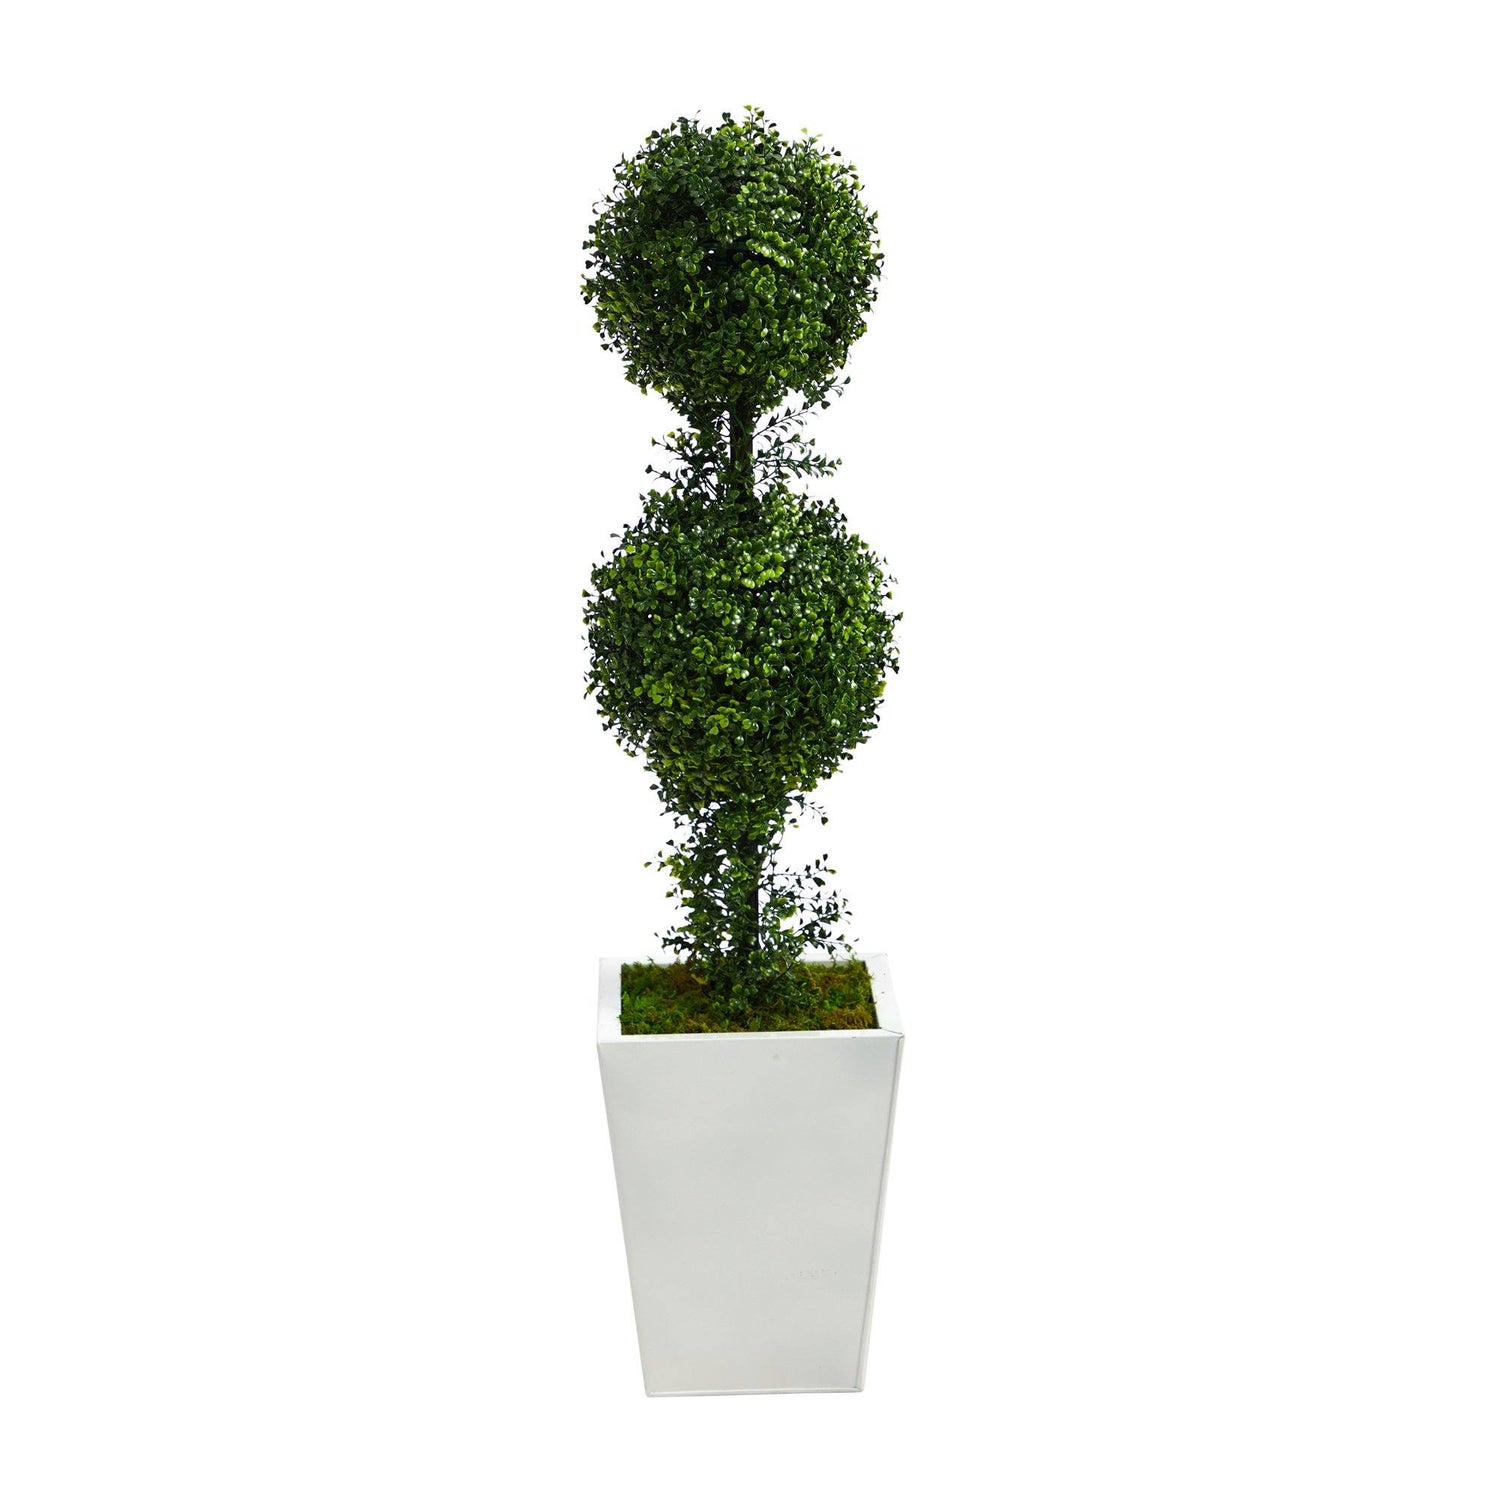 3.5’ Boxwood Double Ball Topiary Artificial Tree in White Metal Planter(Indoor/Outdoor)